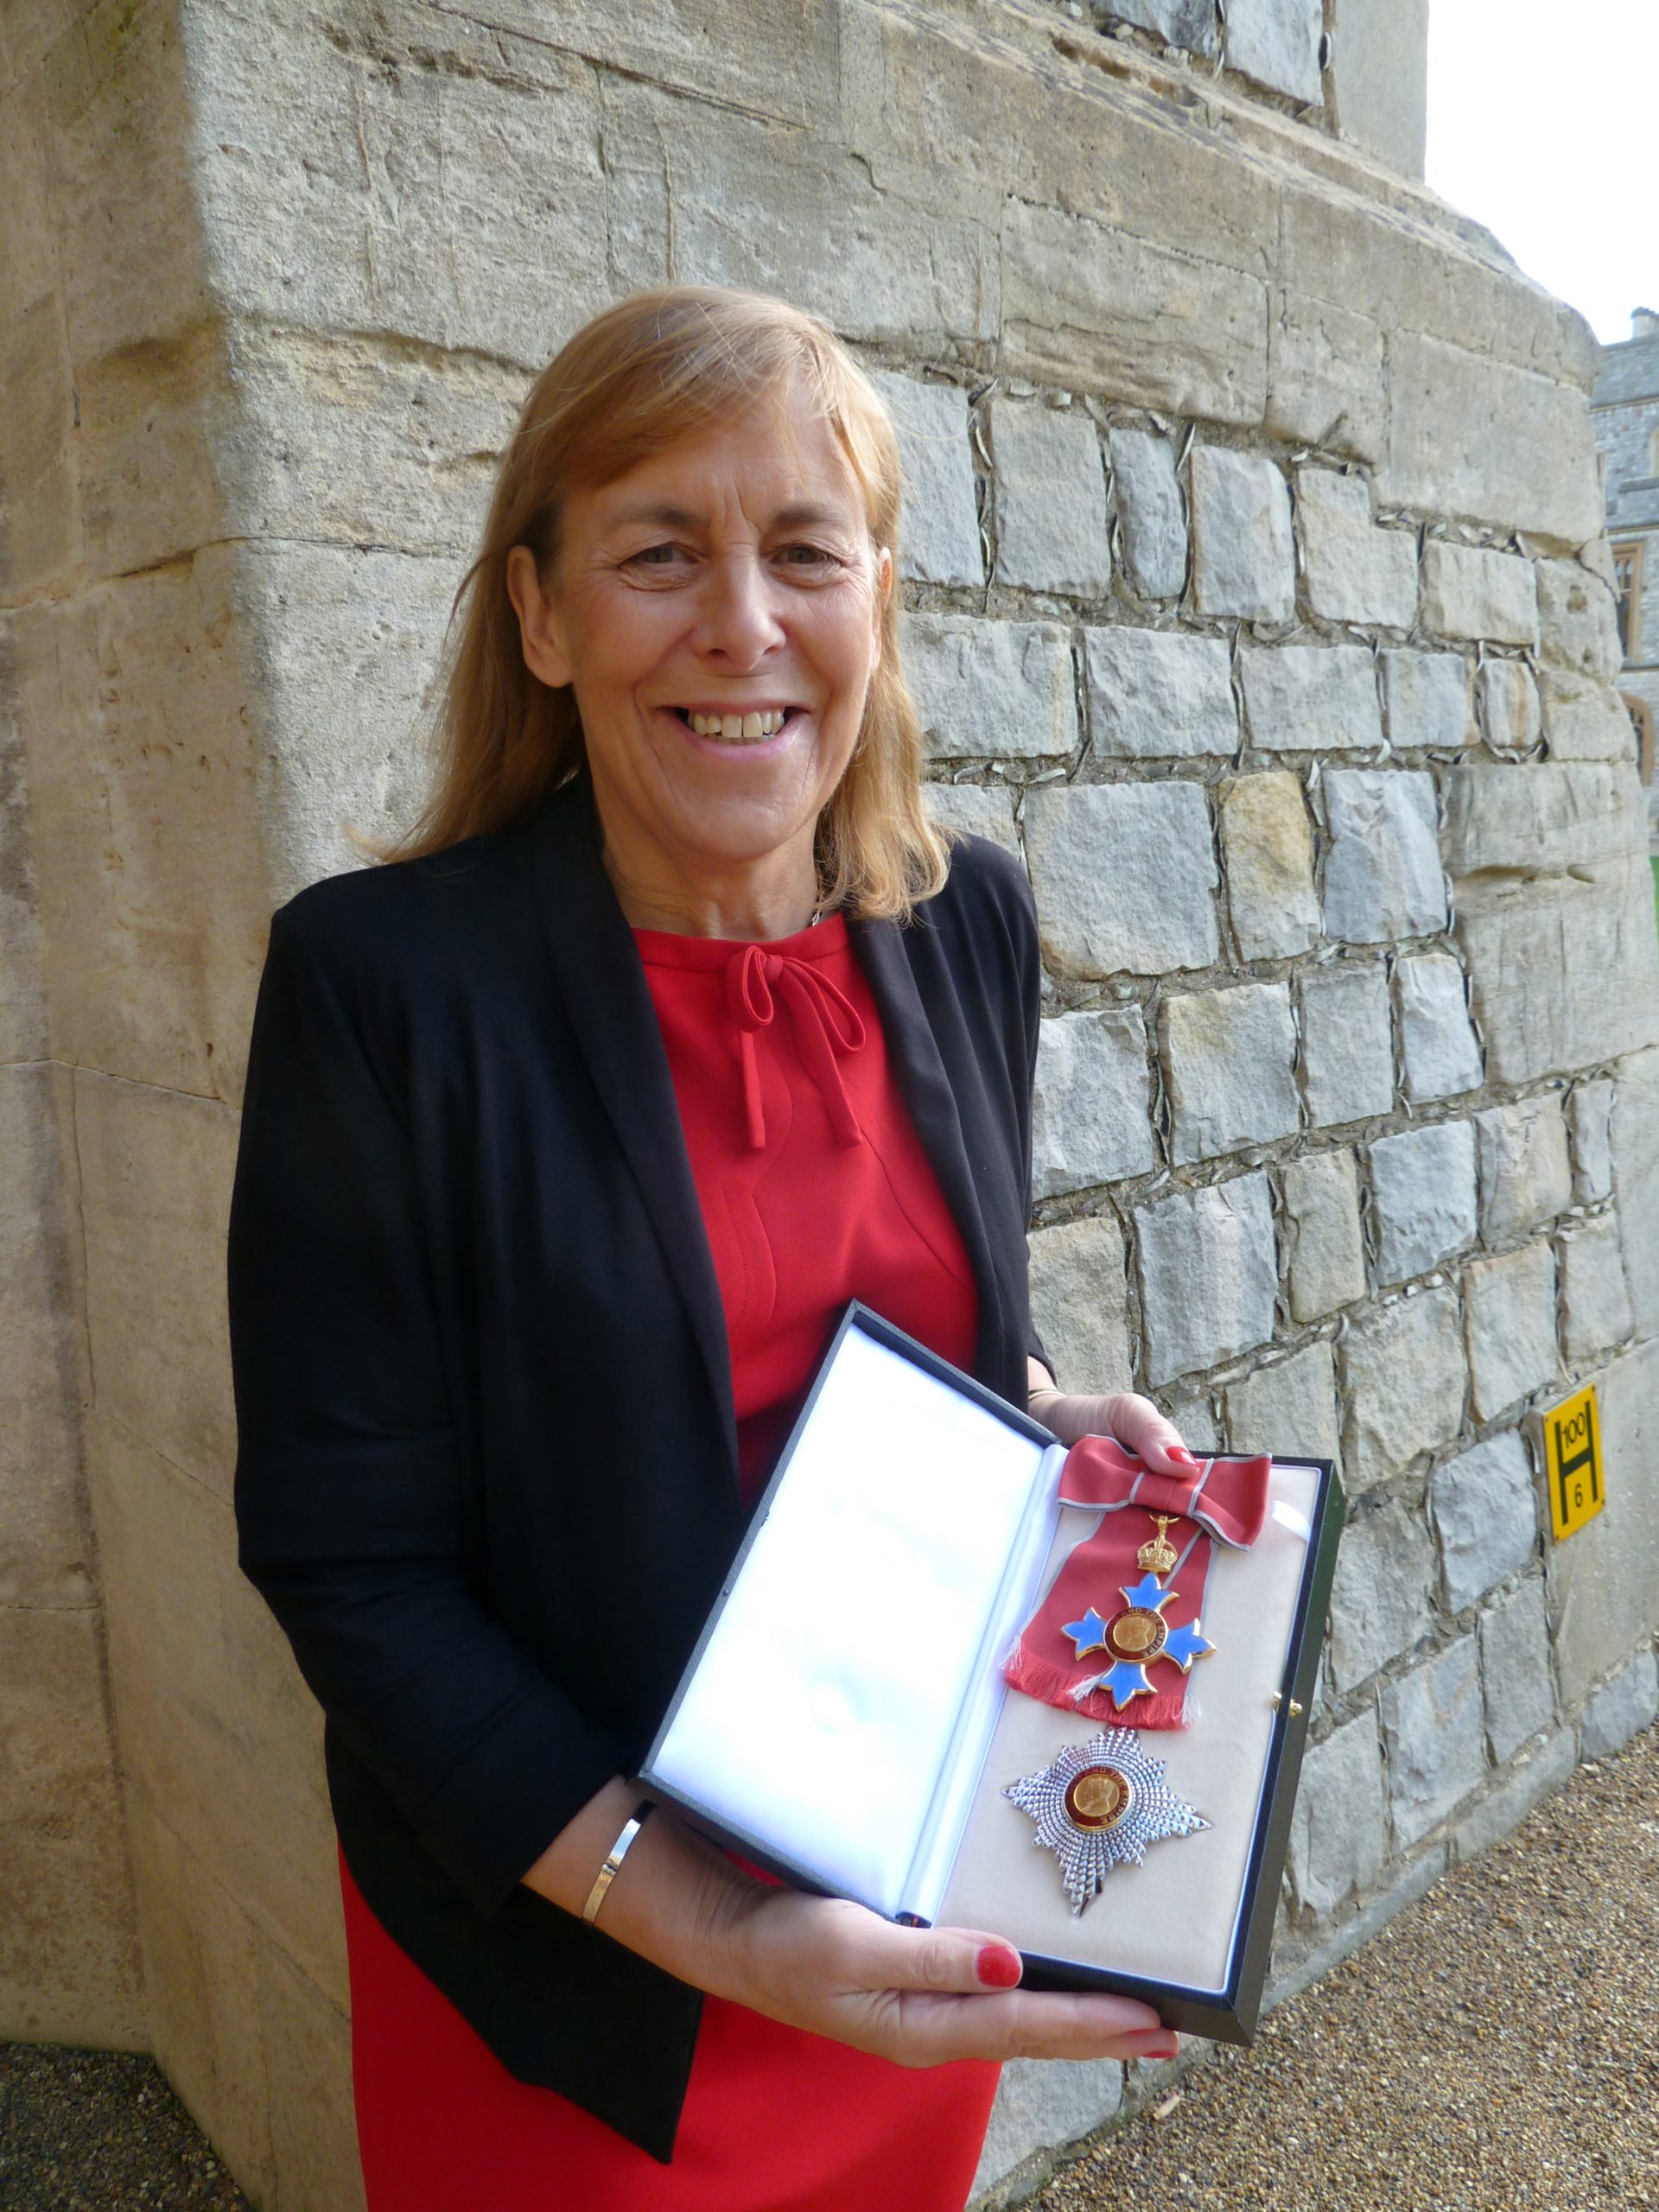 https://www.embl.org/news/wp-content/uploads/2023/05/Janet-holding-her-medal-by-a-wall-1-scaled.jpg